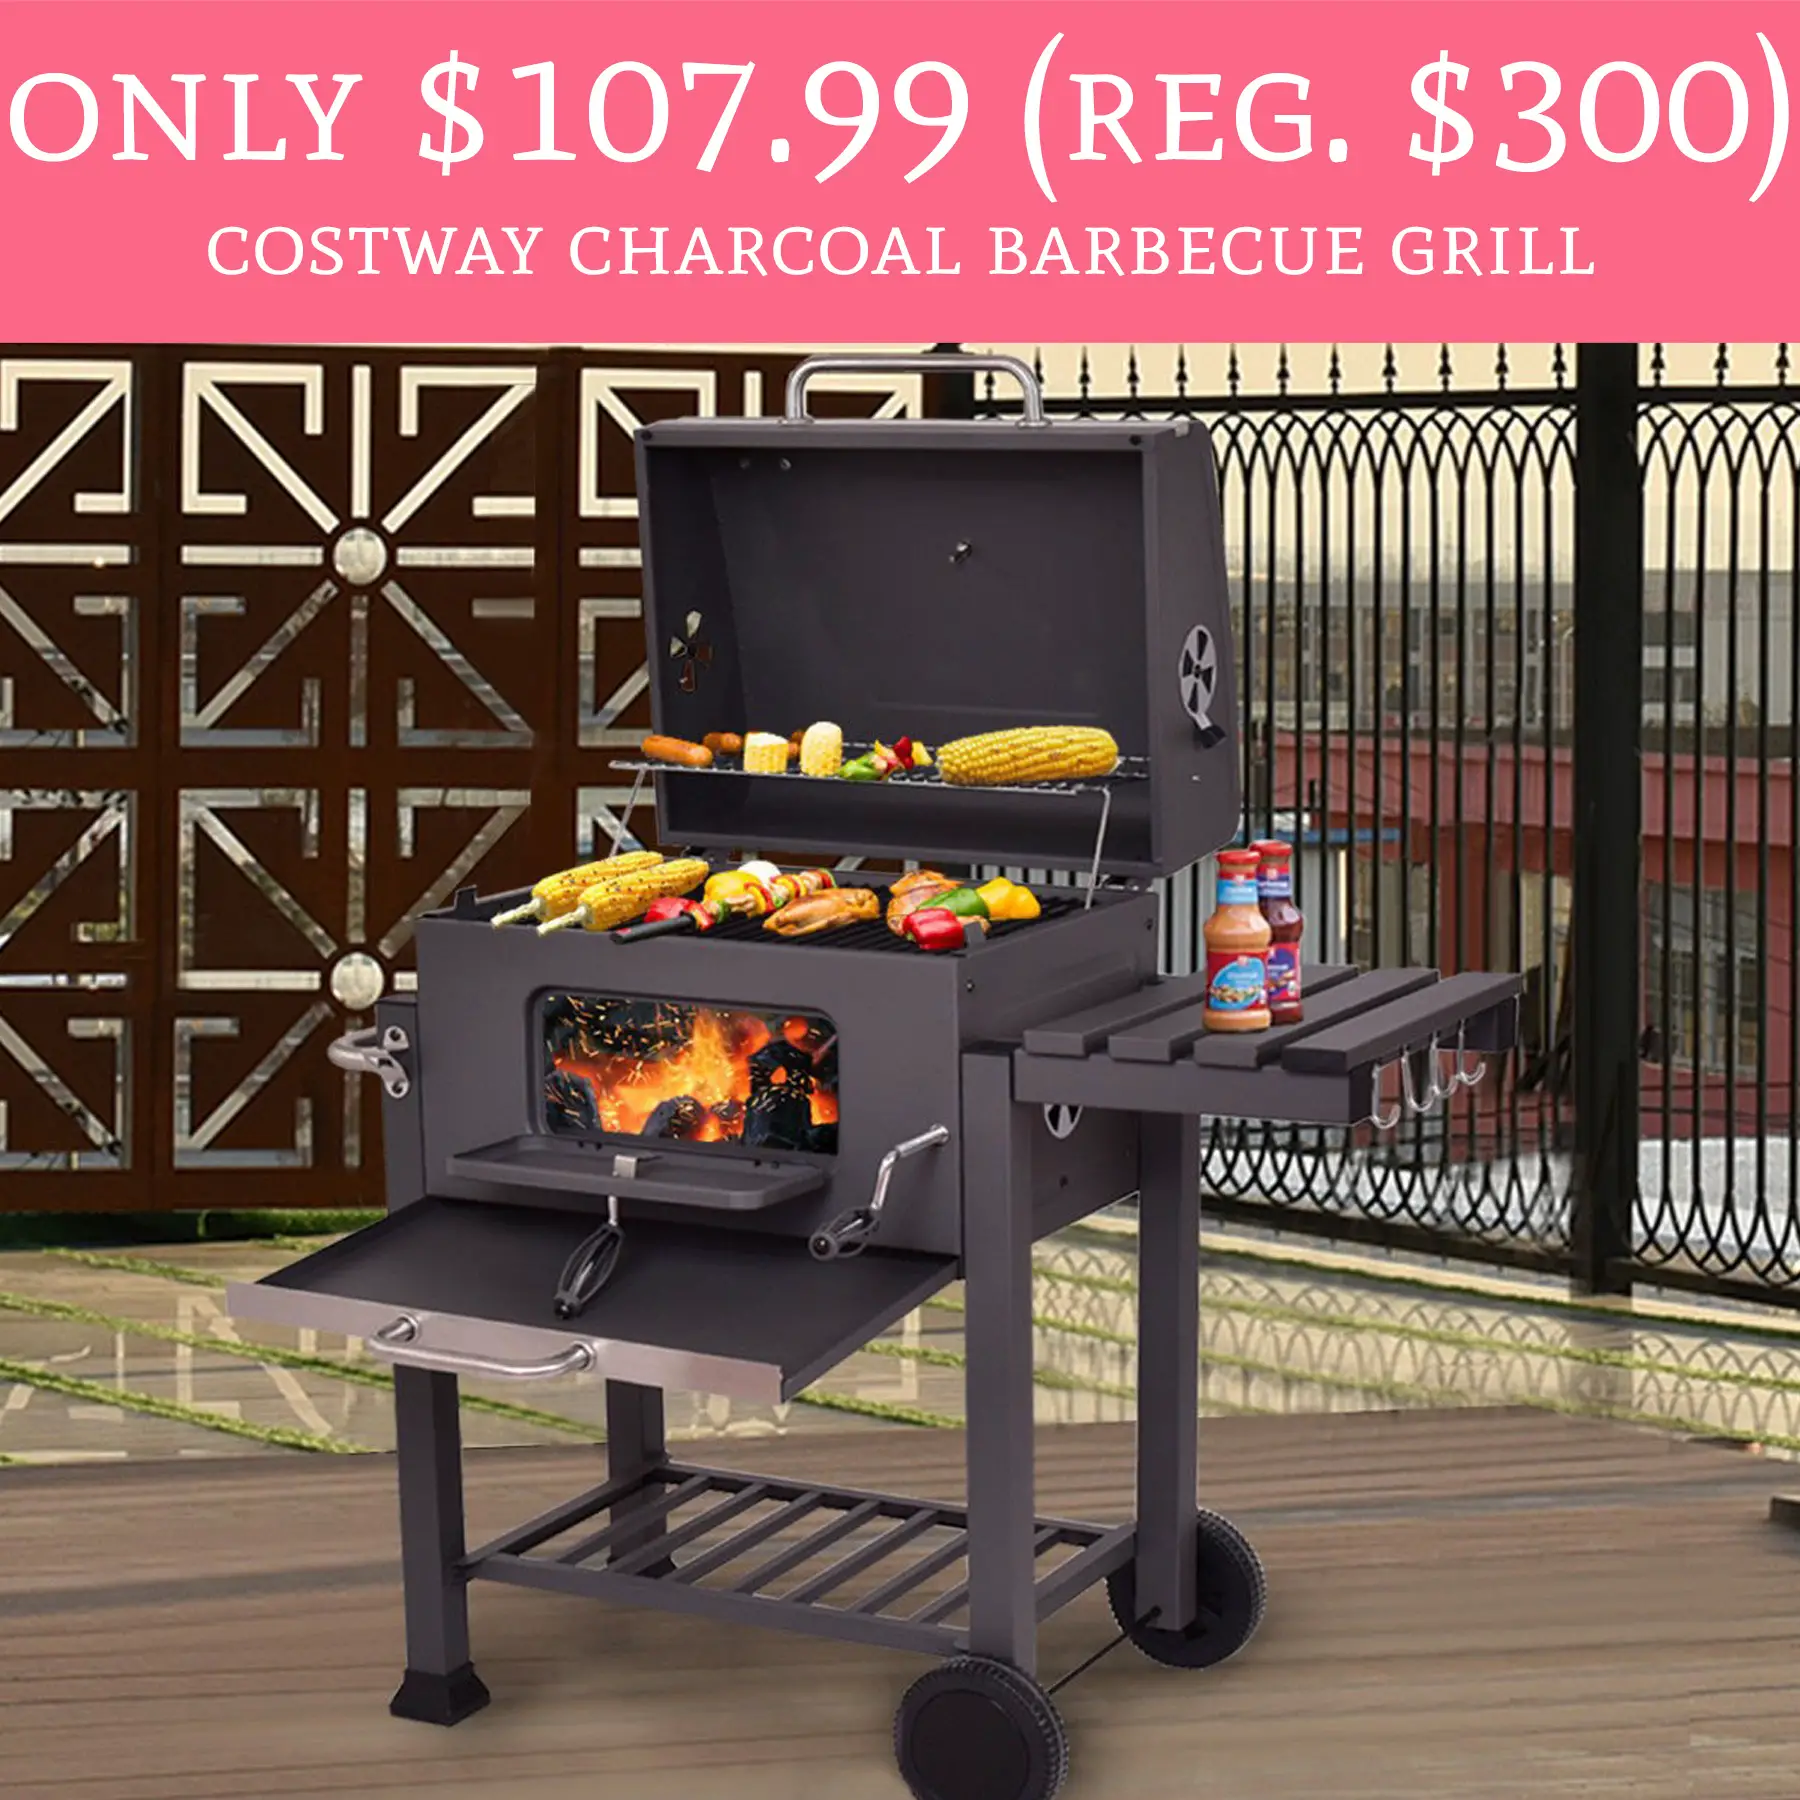 Only $107.99 (Regular $300) Costway Charcoal Barbecue Grill